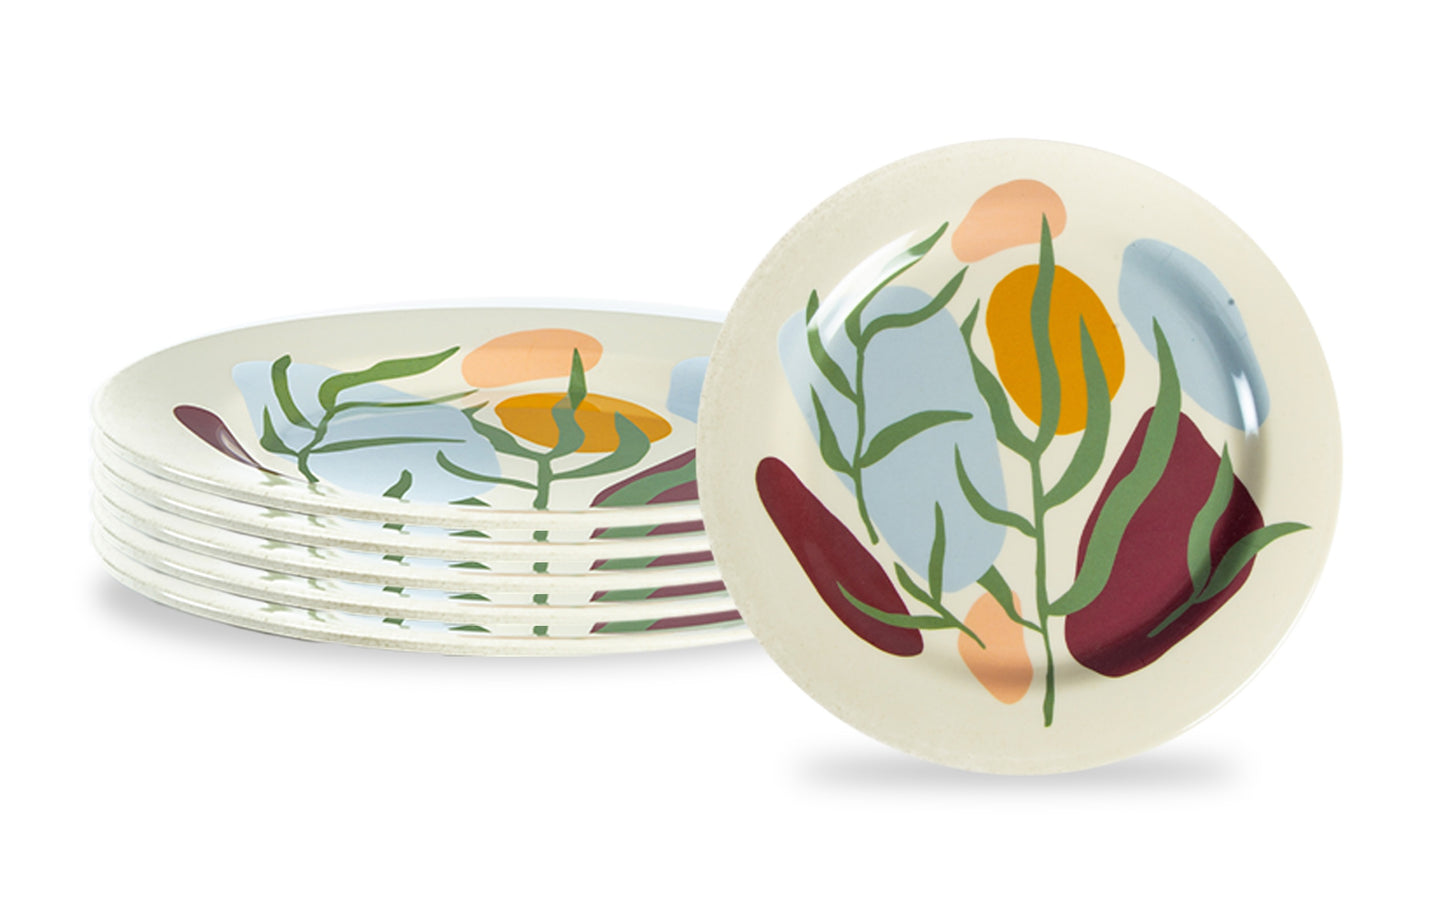 Truly Eco Bamboo Dinner Plates / Plate Sets (Small Plates - 9') - Floral Design - Decor